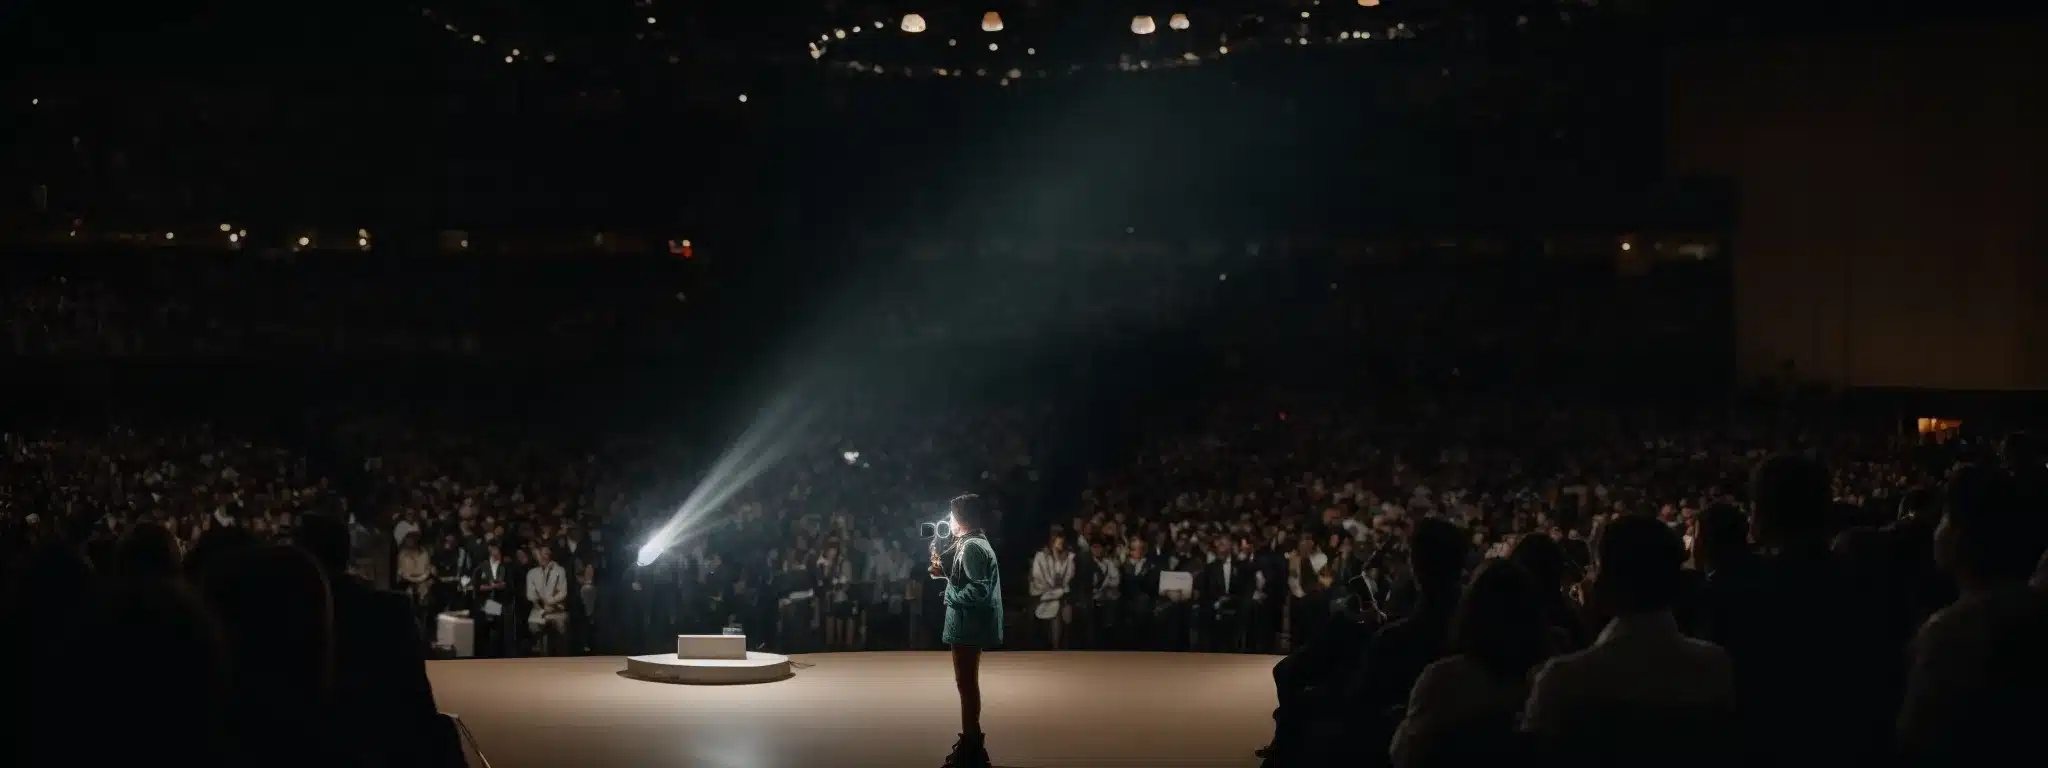 A Spotlight Illuminates A Person Confidently Unveiling A New Product In Front Of An Expectant Crowd.